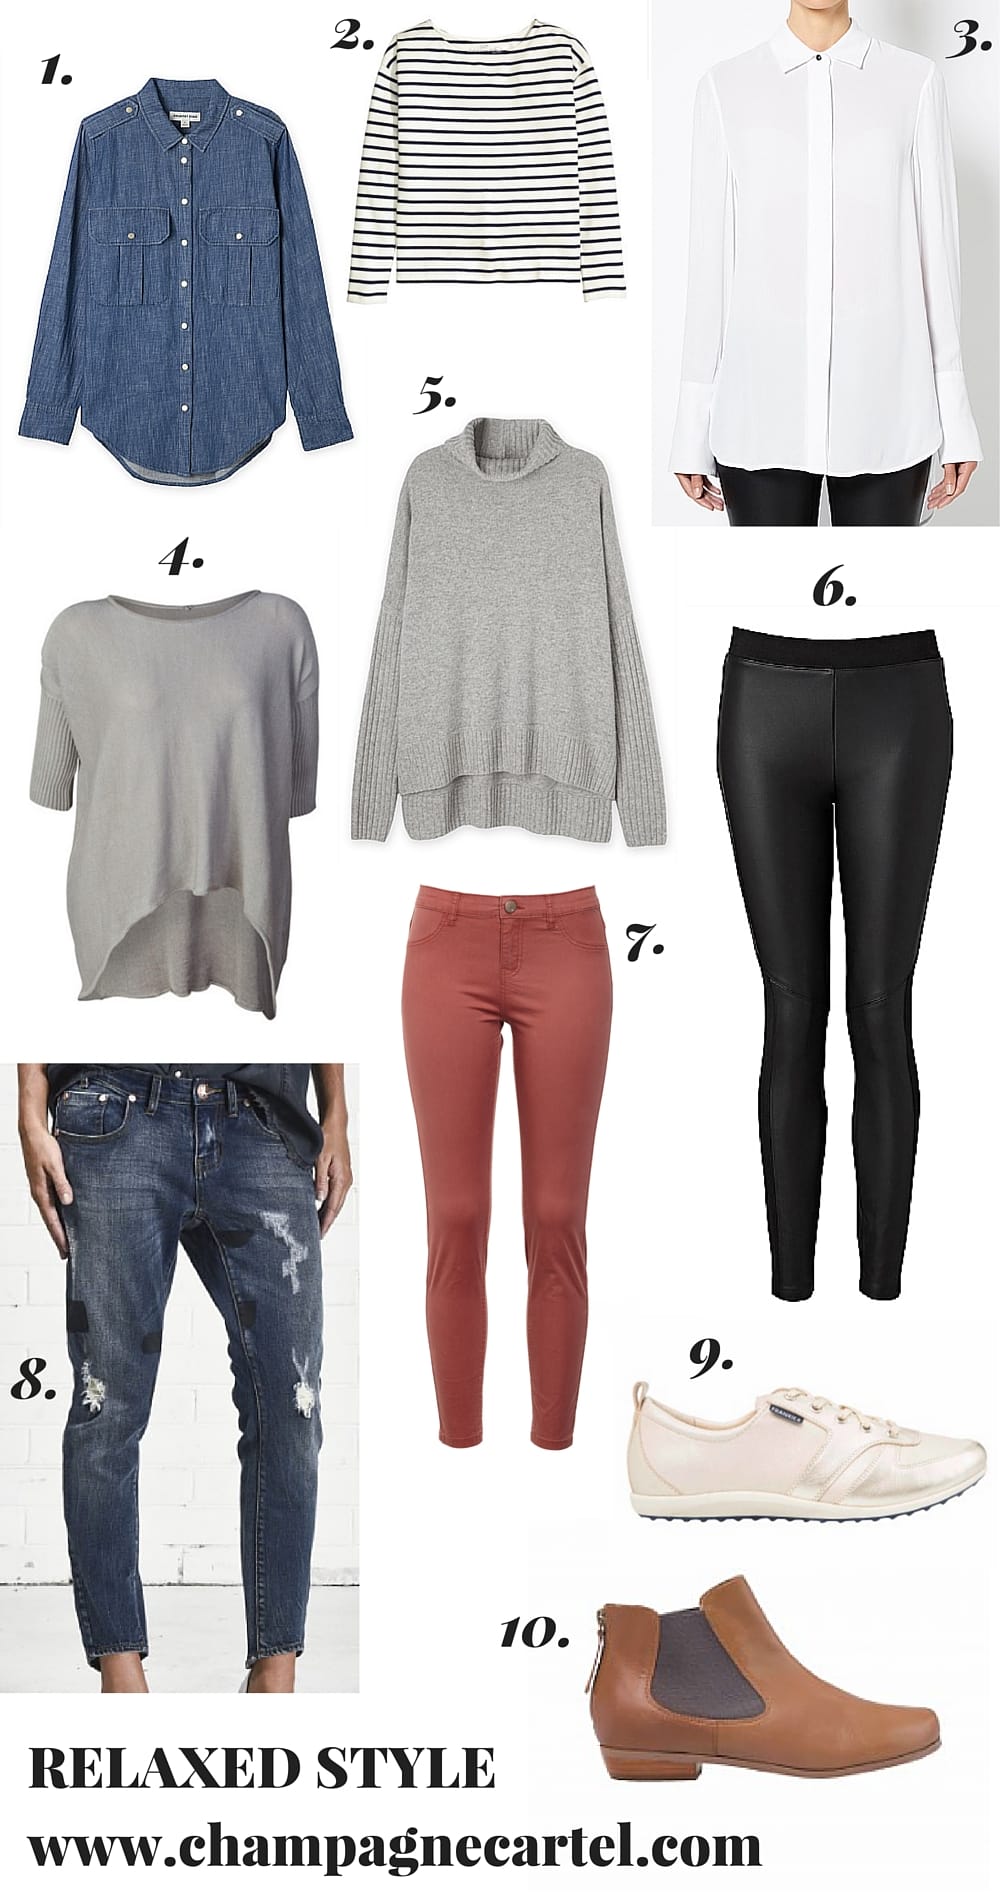 A Guide to Choose Comfortable and Stylish Women's Casual Wear